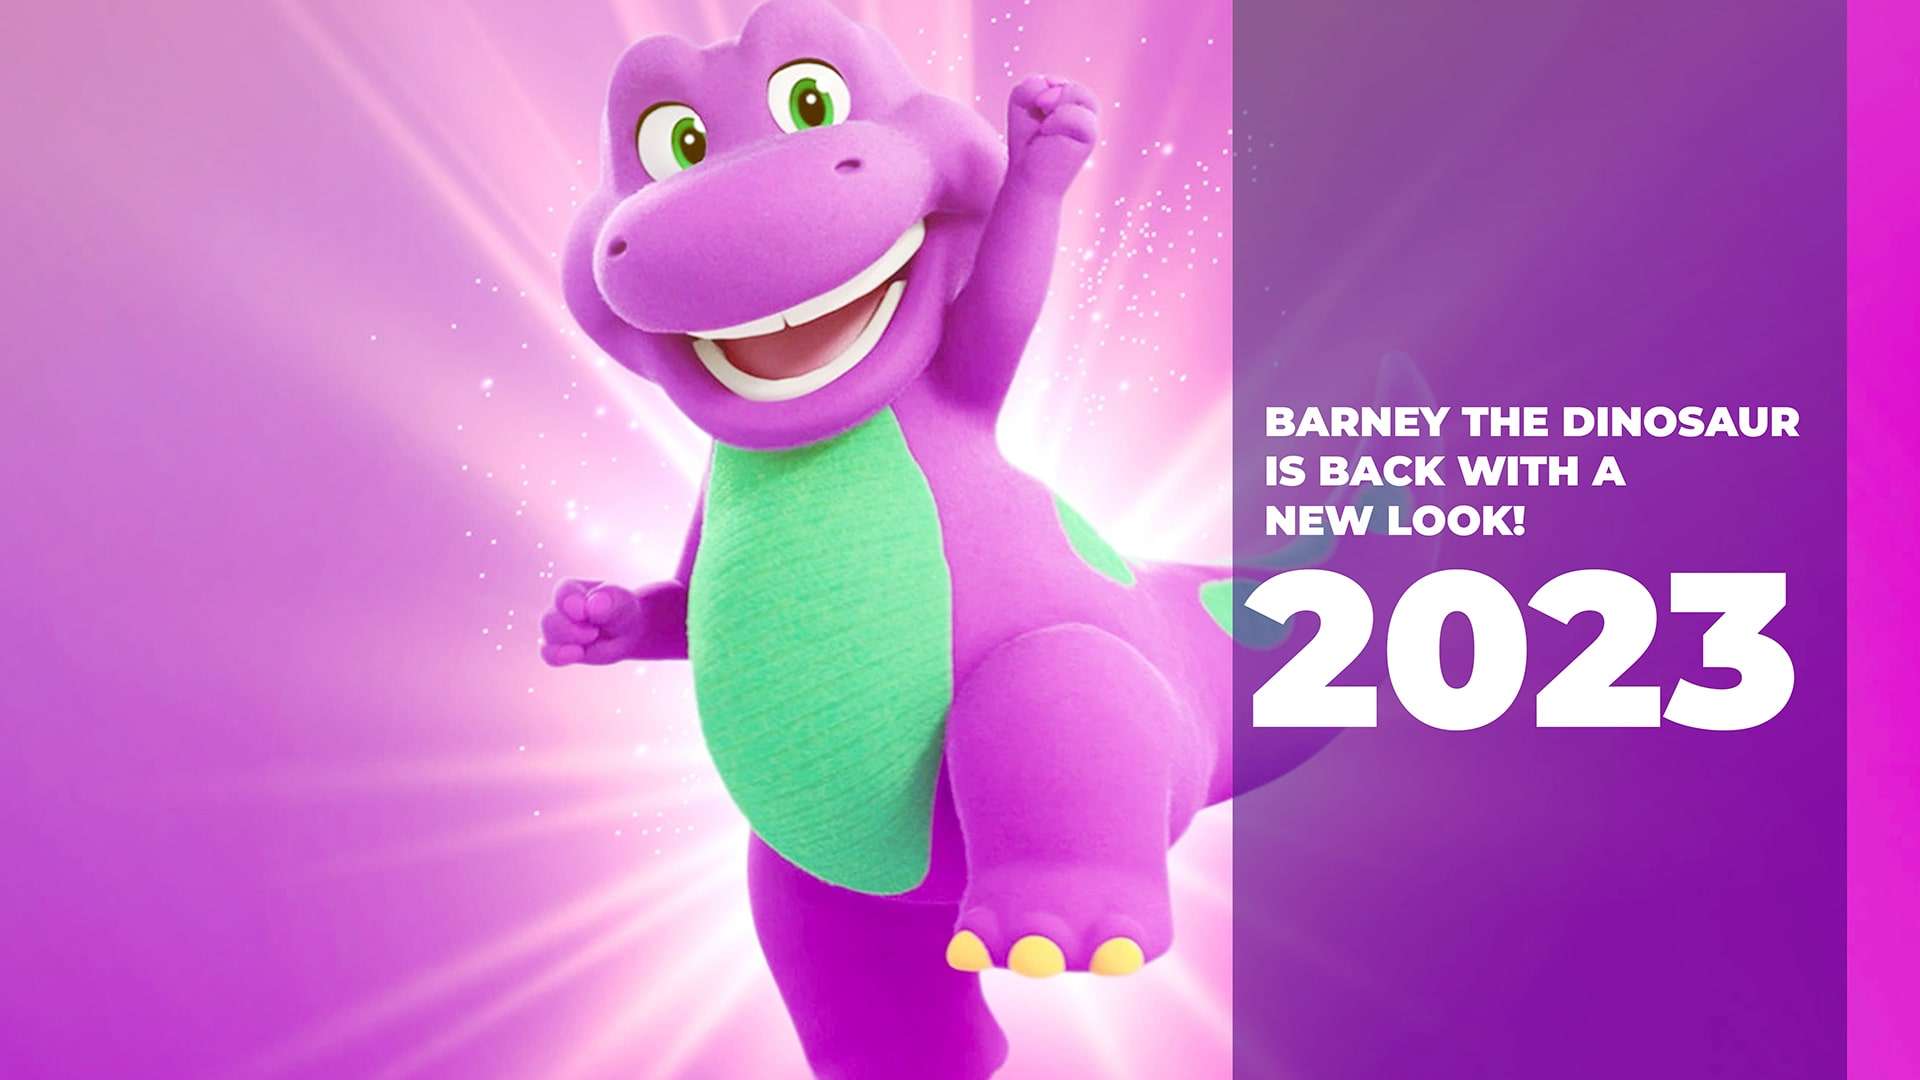 BARNEY THE DINOSAUR IS BACK WITH A NEW LOOK